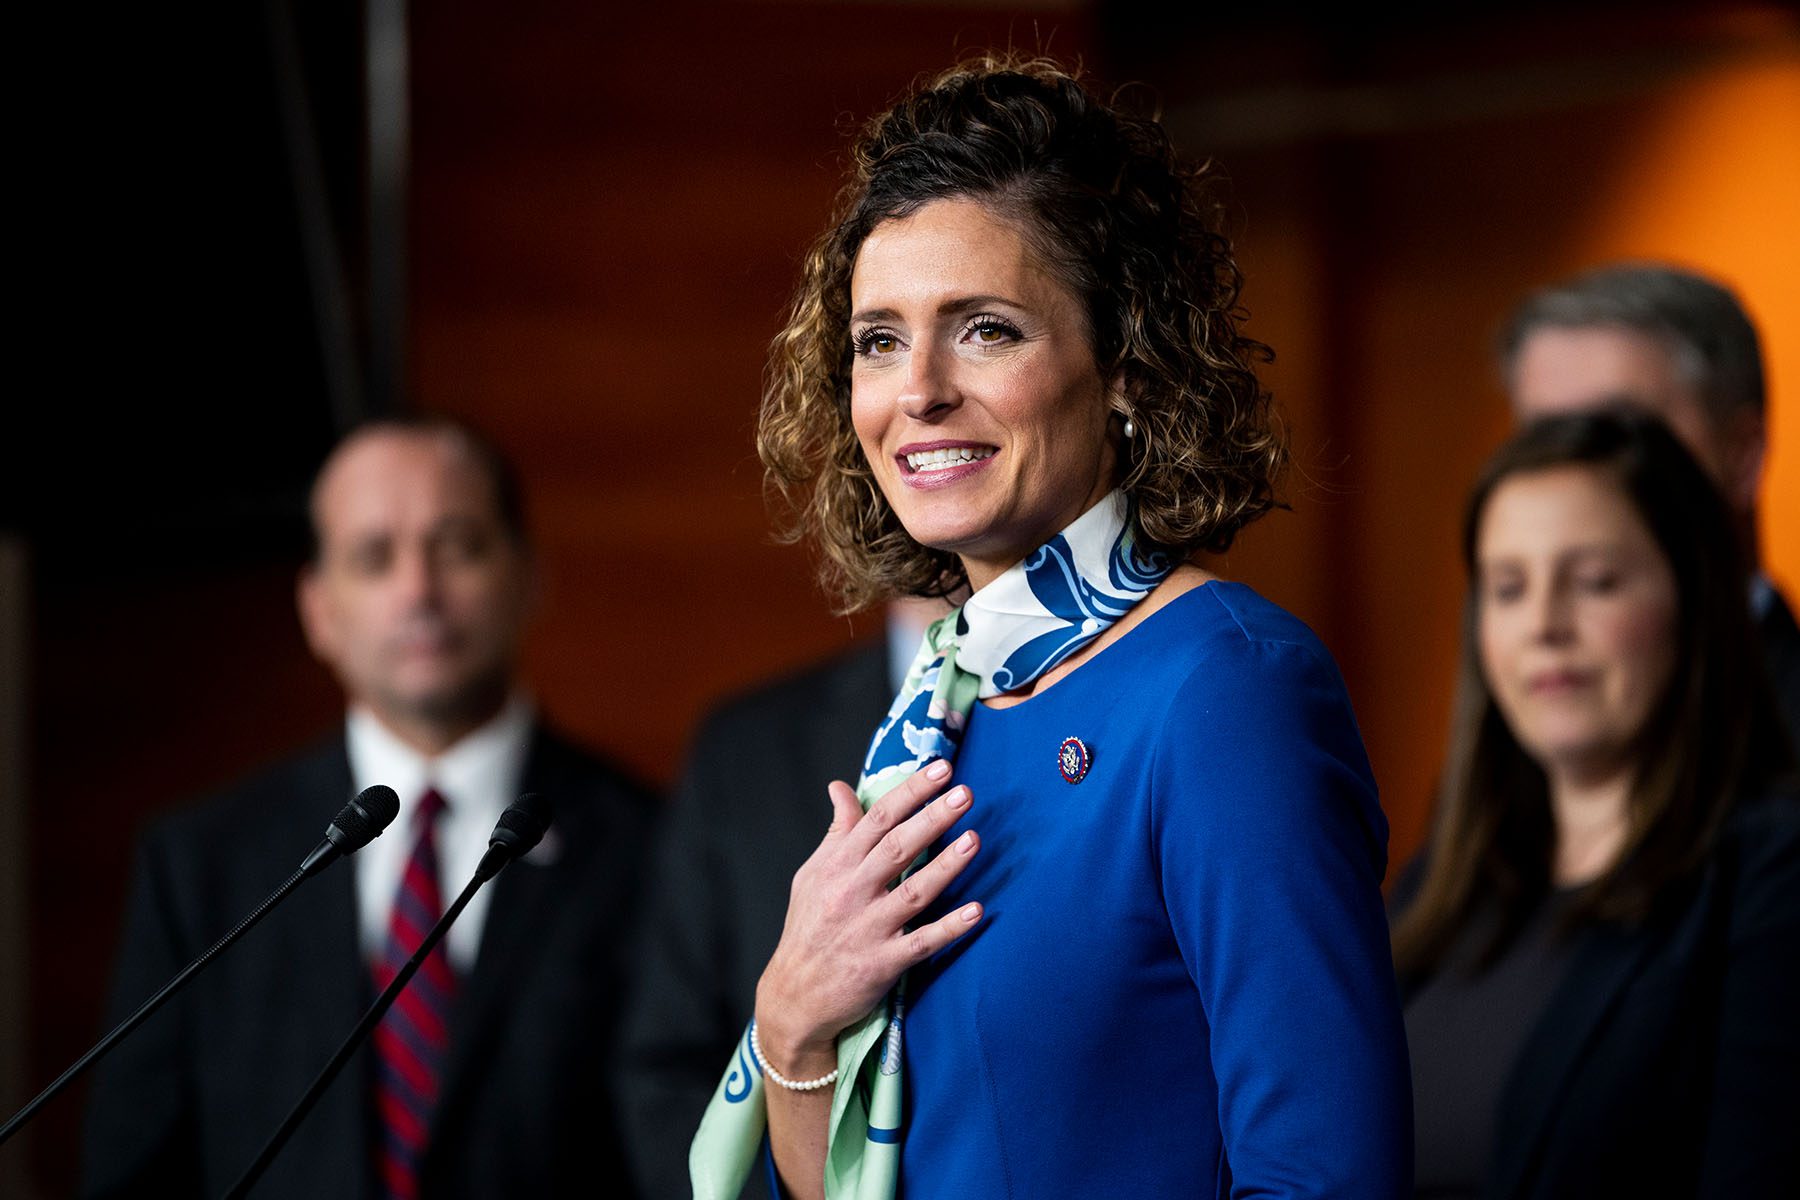 Rep. Julia Letlow speaks into a microphone during a press conference